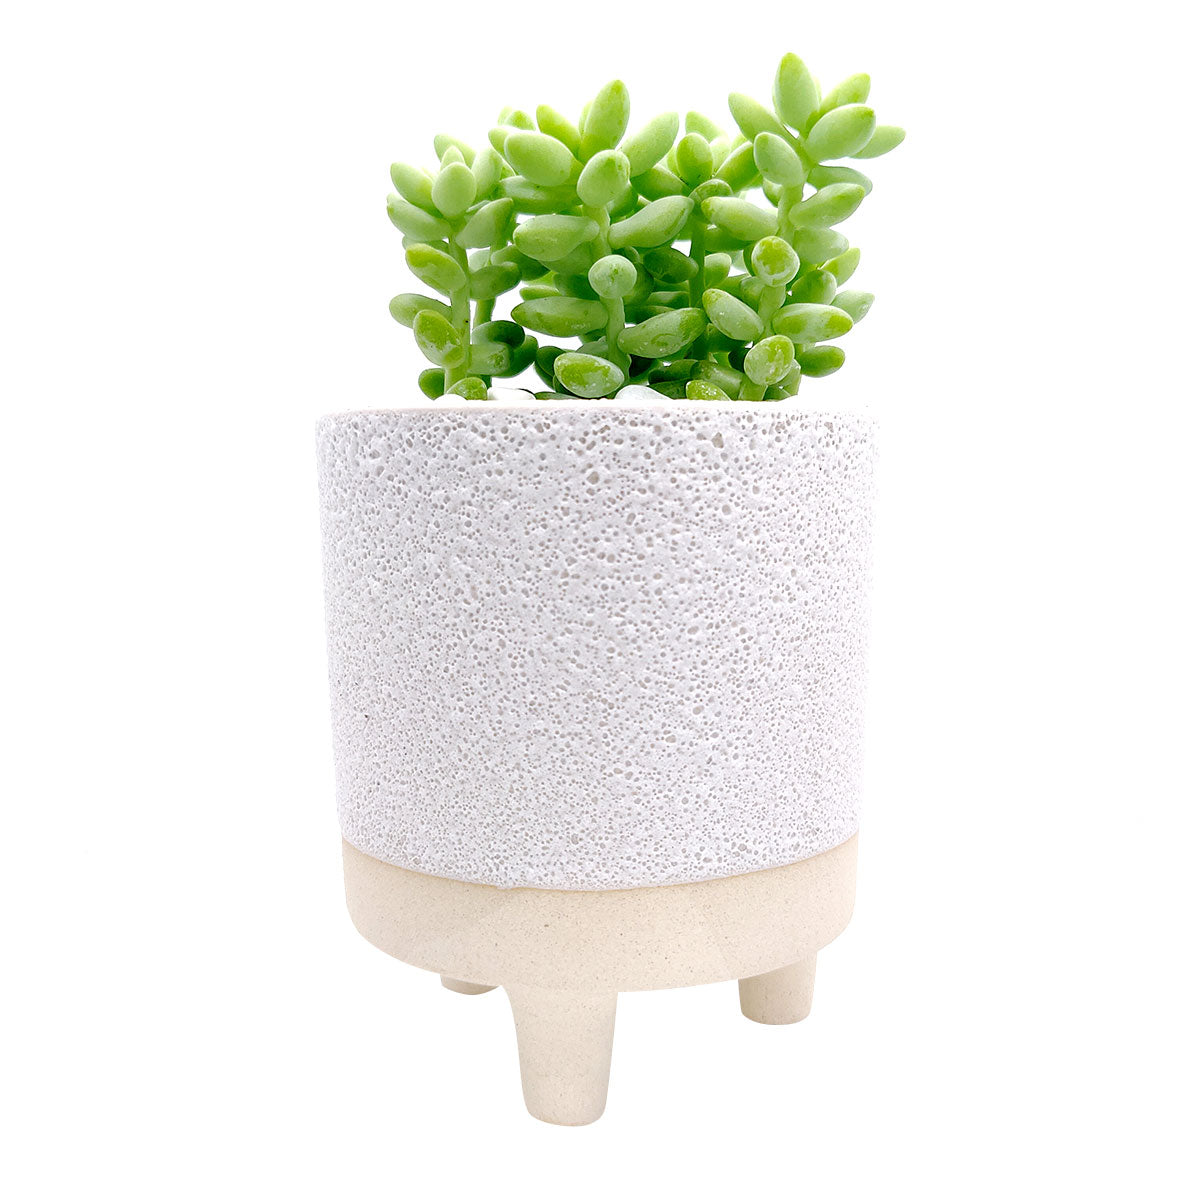 4 inch Bubbled Ceramic Footed Pot for sale, Designed Ceramic pot for succulent and cactus, small flower pot, Succulent pot decor ideas, succulent gift ideas